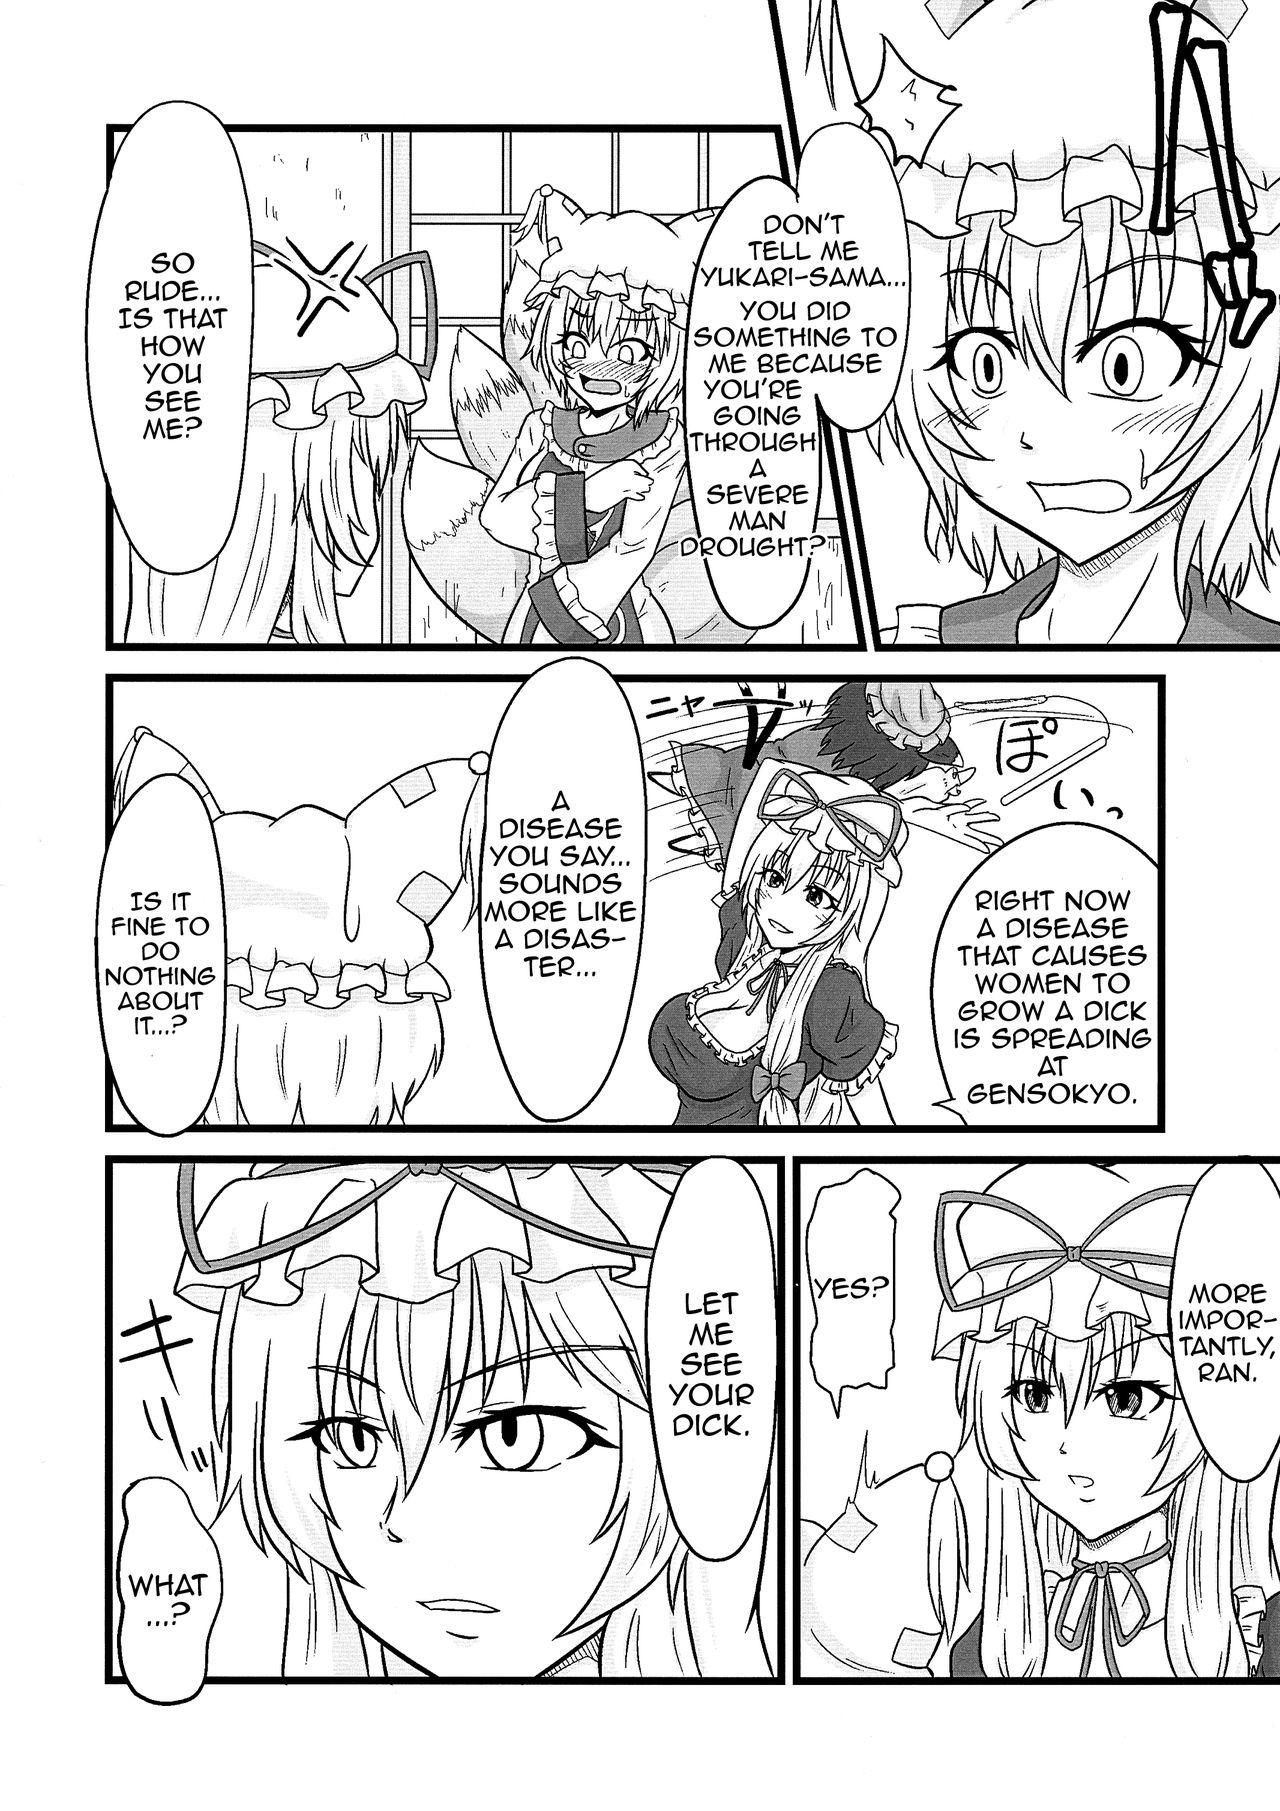 Sex Toys Ran < Chen - Touhou project Gaysex - Page 4